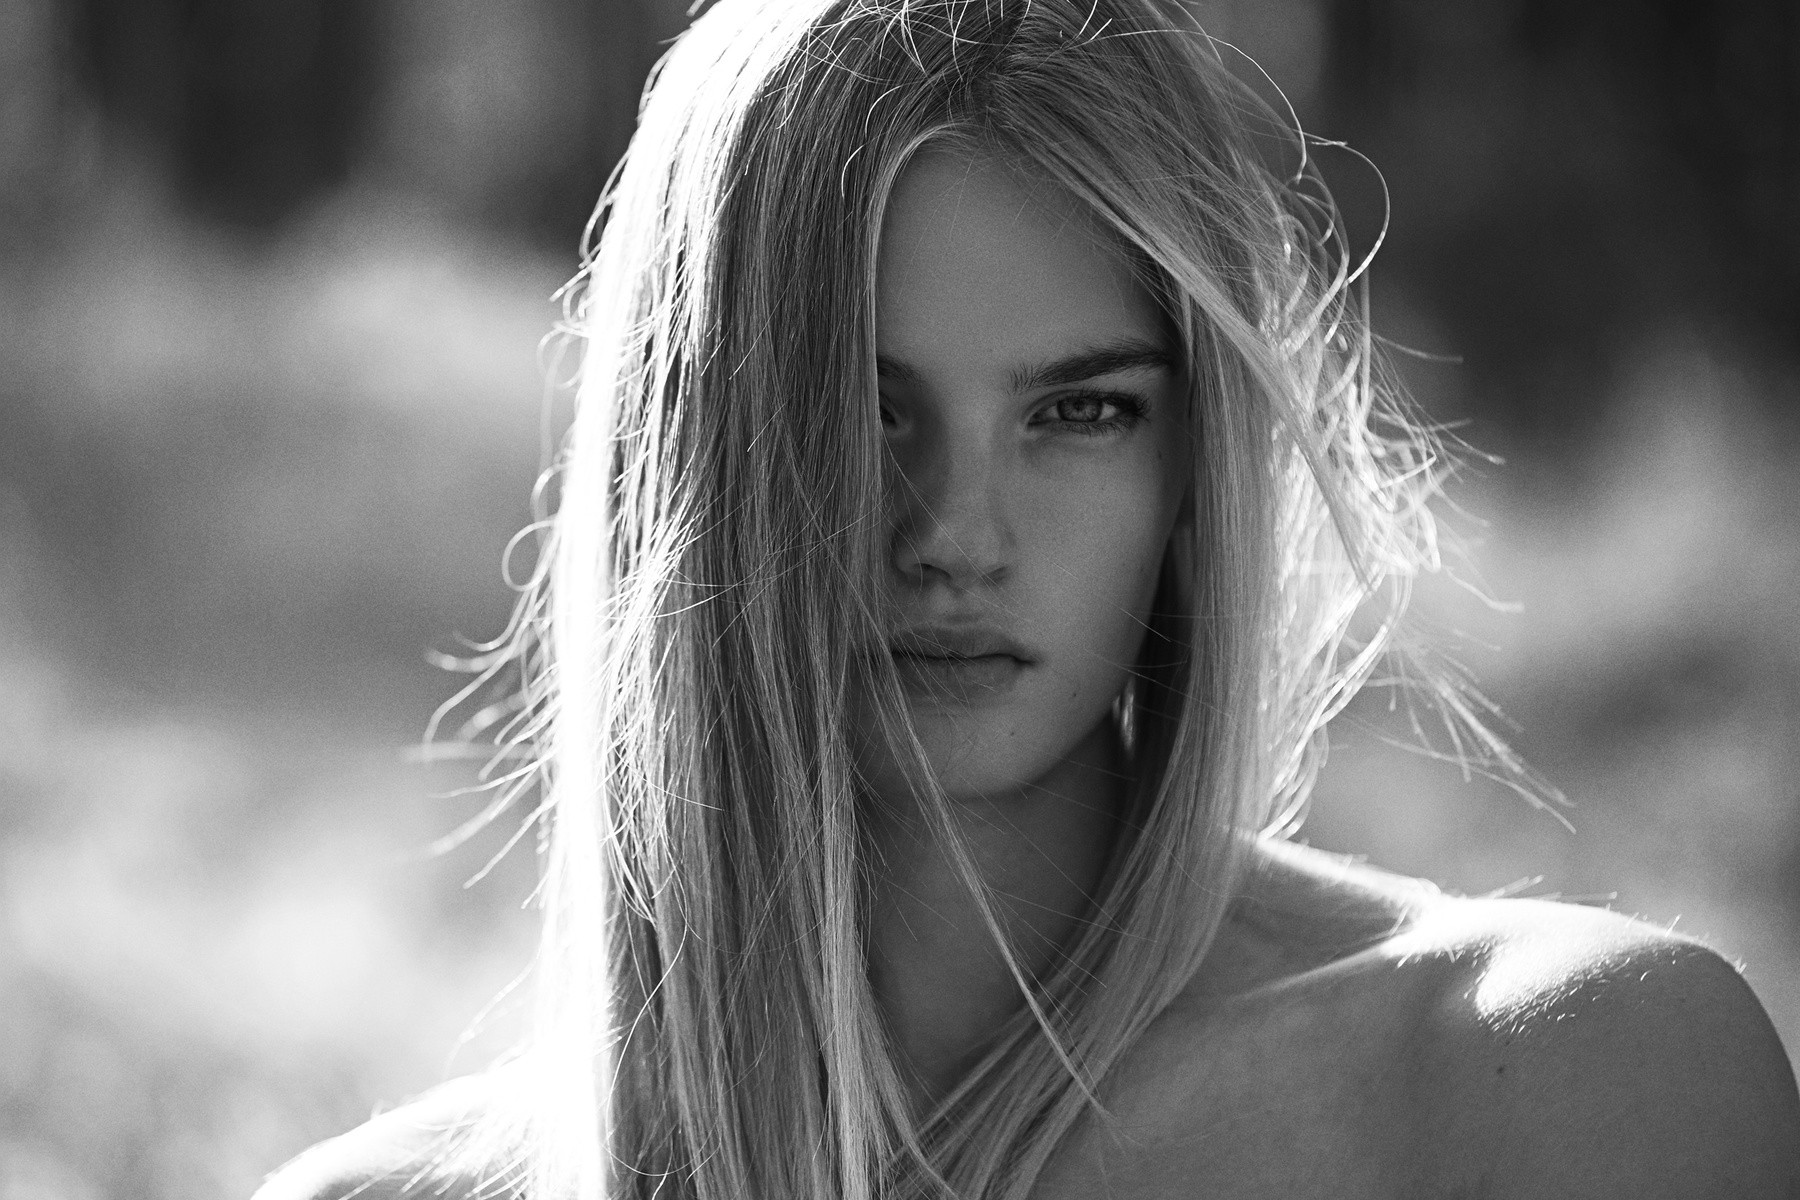 Women Model Monochrome Blonde Isabel Scholten Looking At Viewer Face Long Hair Hair Covering Eyes Ha 1800x1200